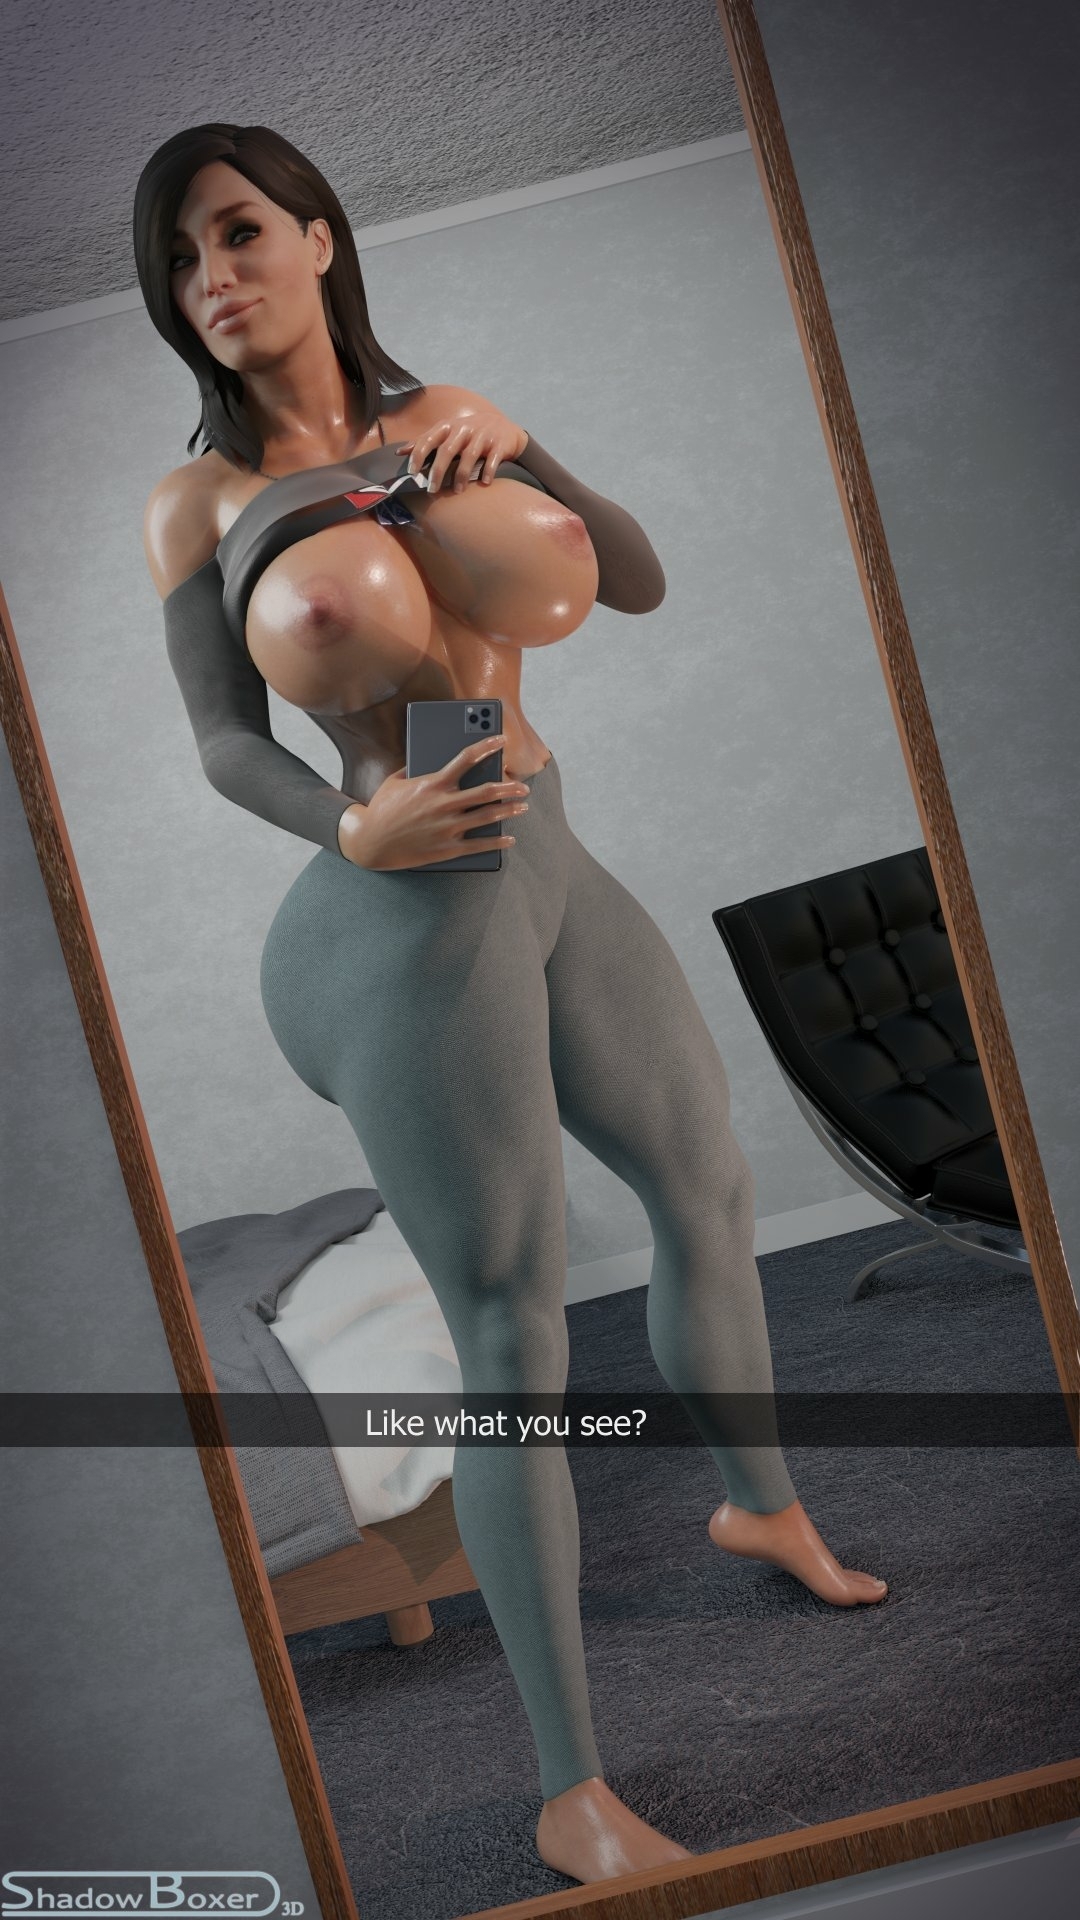 👀Ashley in some workout gear🥵 Ashley Williams Mass Effect Nipples Boobs Big boobs Cake Ass Big Ass Big Tits Tits Sexy Horny Face Horny 3d Porn 2